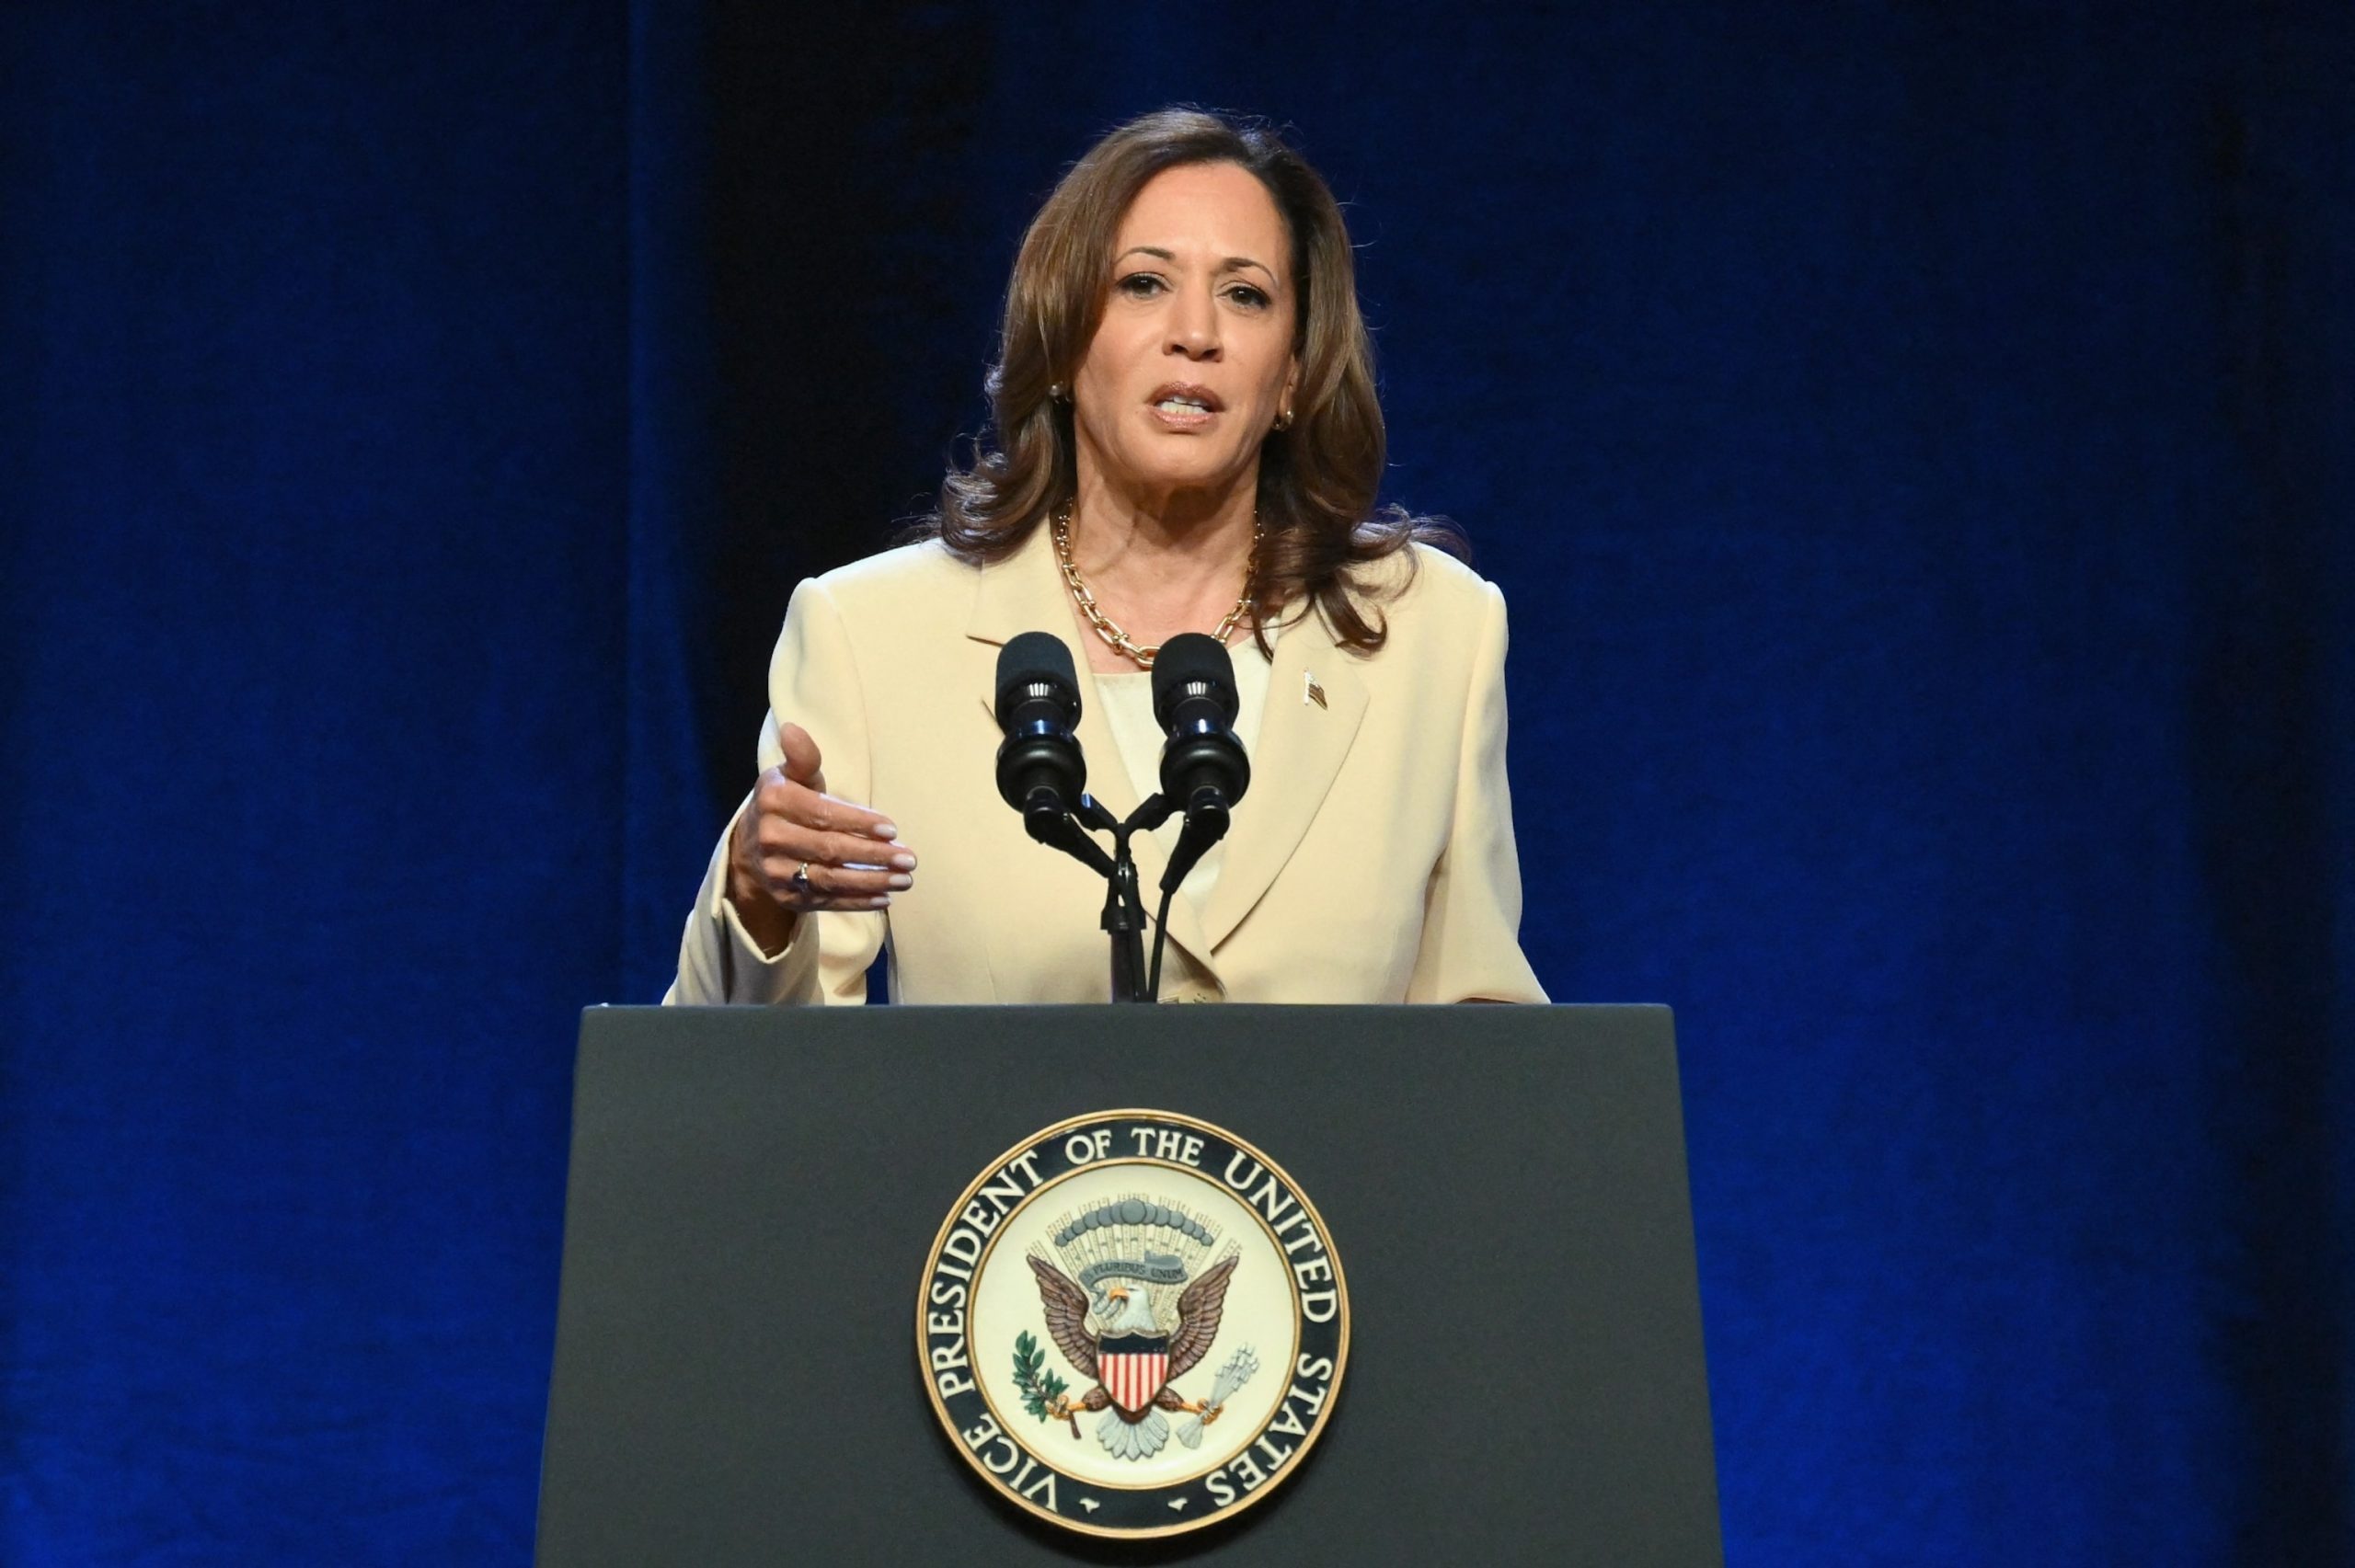 Increased attention and speculation surrounding Kamala Harris in the event of Biden's withdrawal